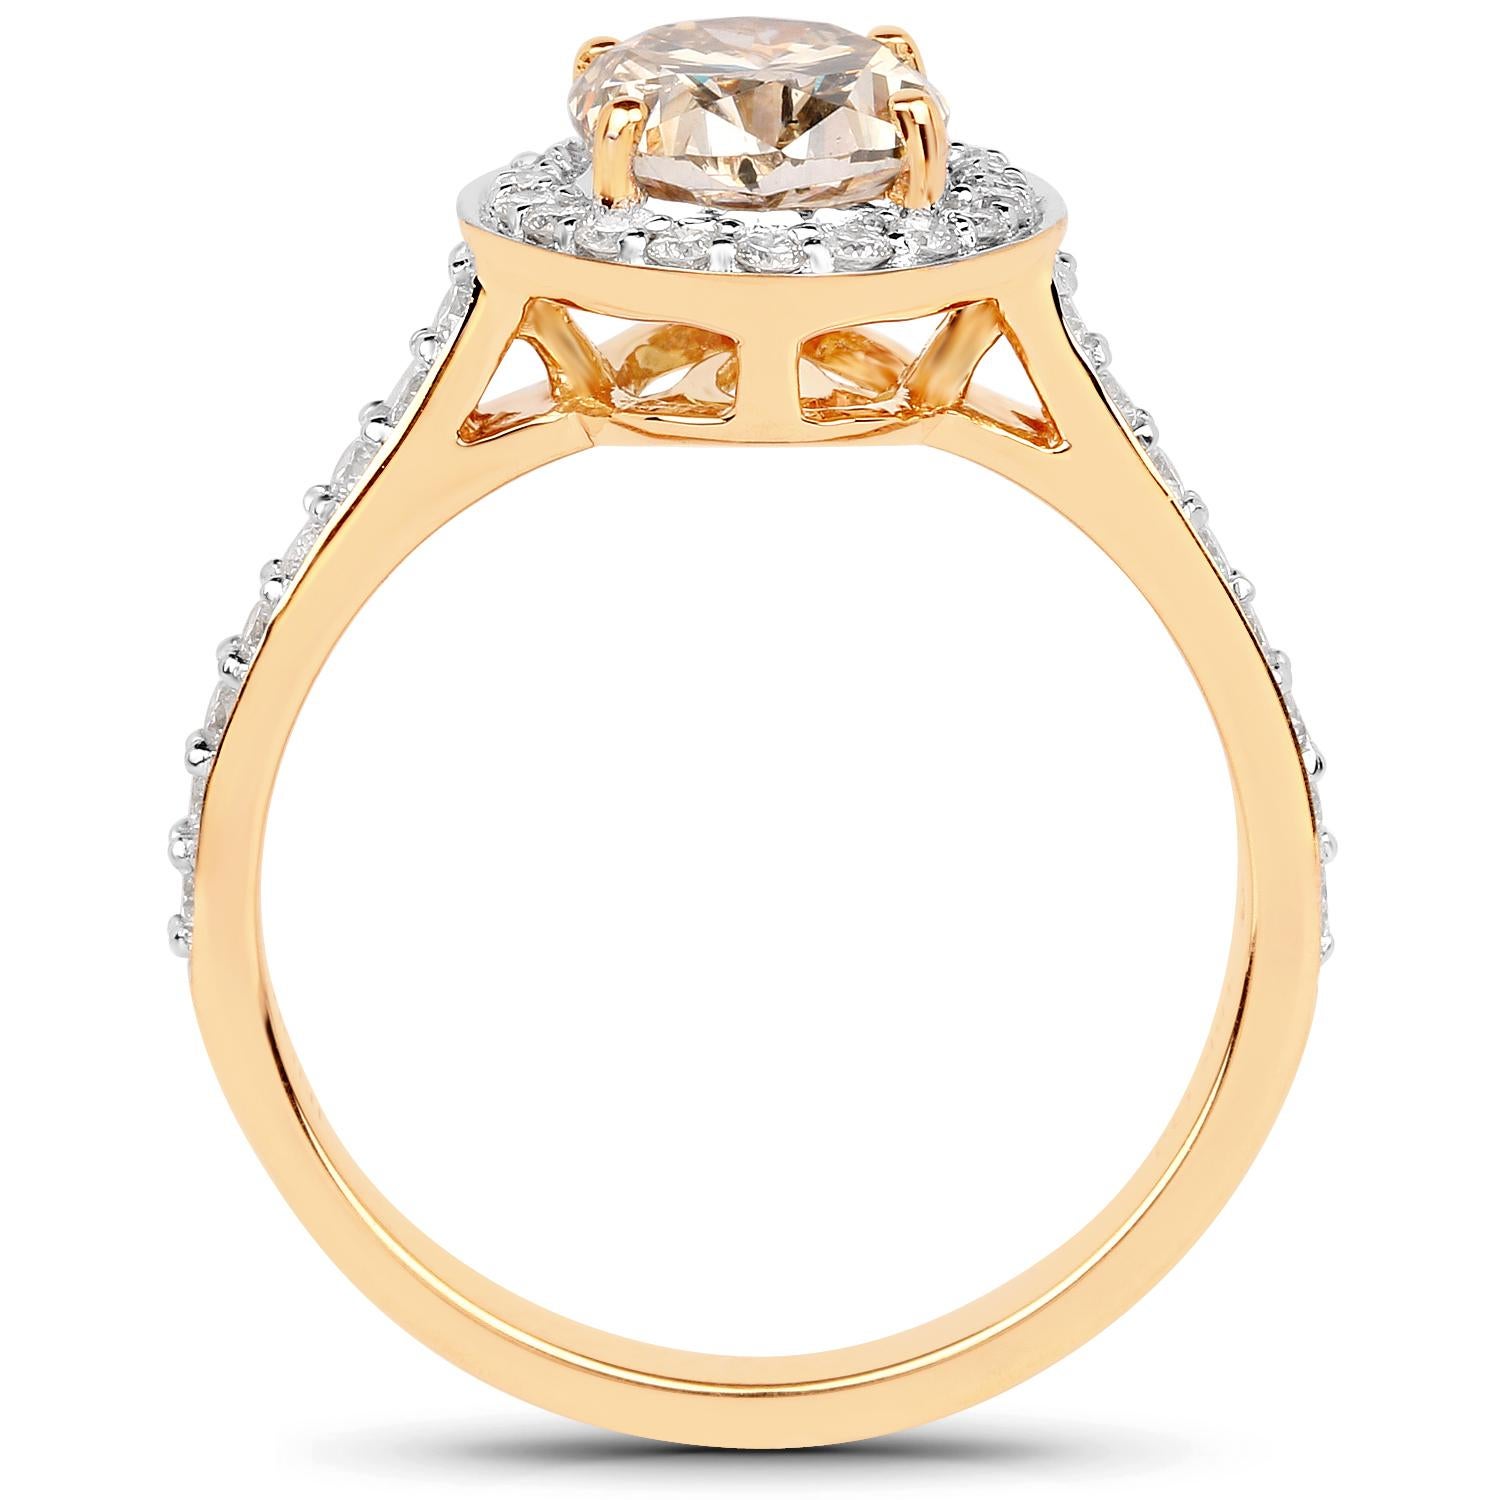 1.74 Carat Oval Shaped Champagne Diamond and 0.44 Carats White Diamond 18K Yellow Gold Bridal Ring

Center Stone Details: 
Stone: Champagne Diamond (untreated)
Shape: Oval cut 
Size: 8.40mm x 6.60mm
Weight: 1.74 carat
Quality: SI2-I1, Natural Brown